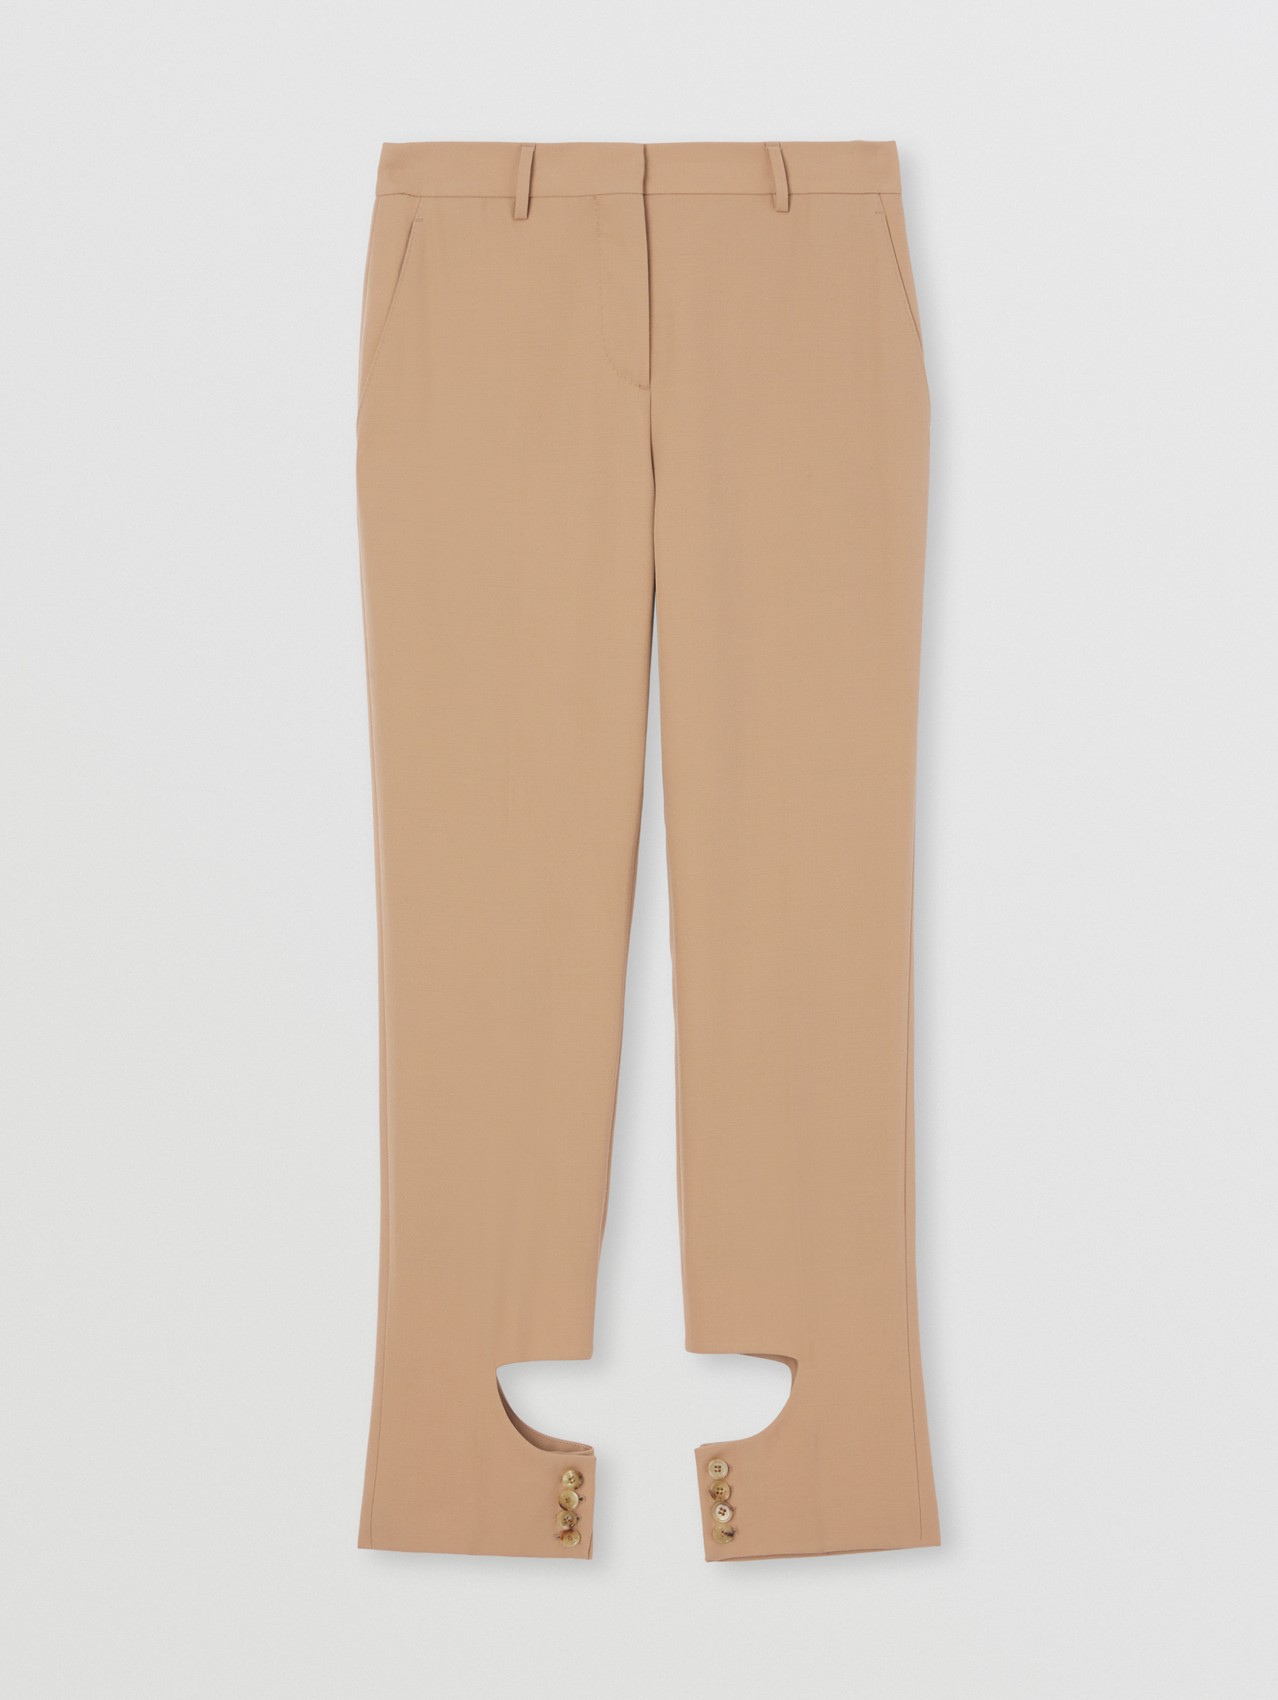 Cut-out Detail Grain De Poudre Wool Tailored Trousers in Dark Biscuit